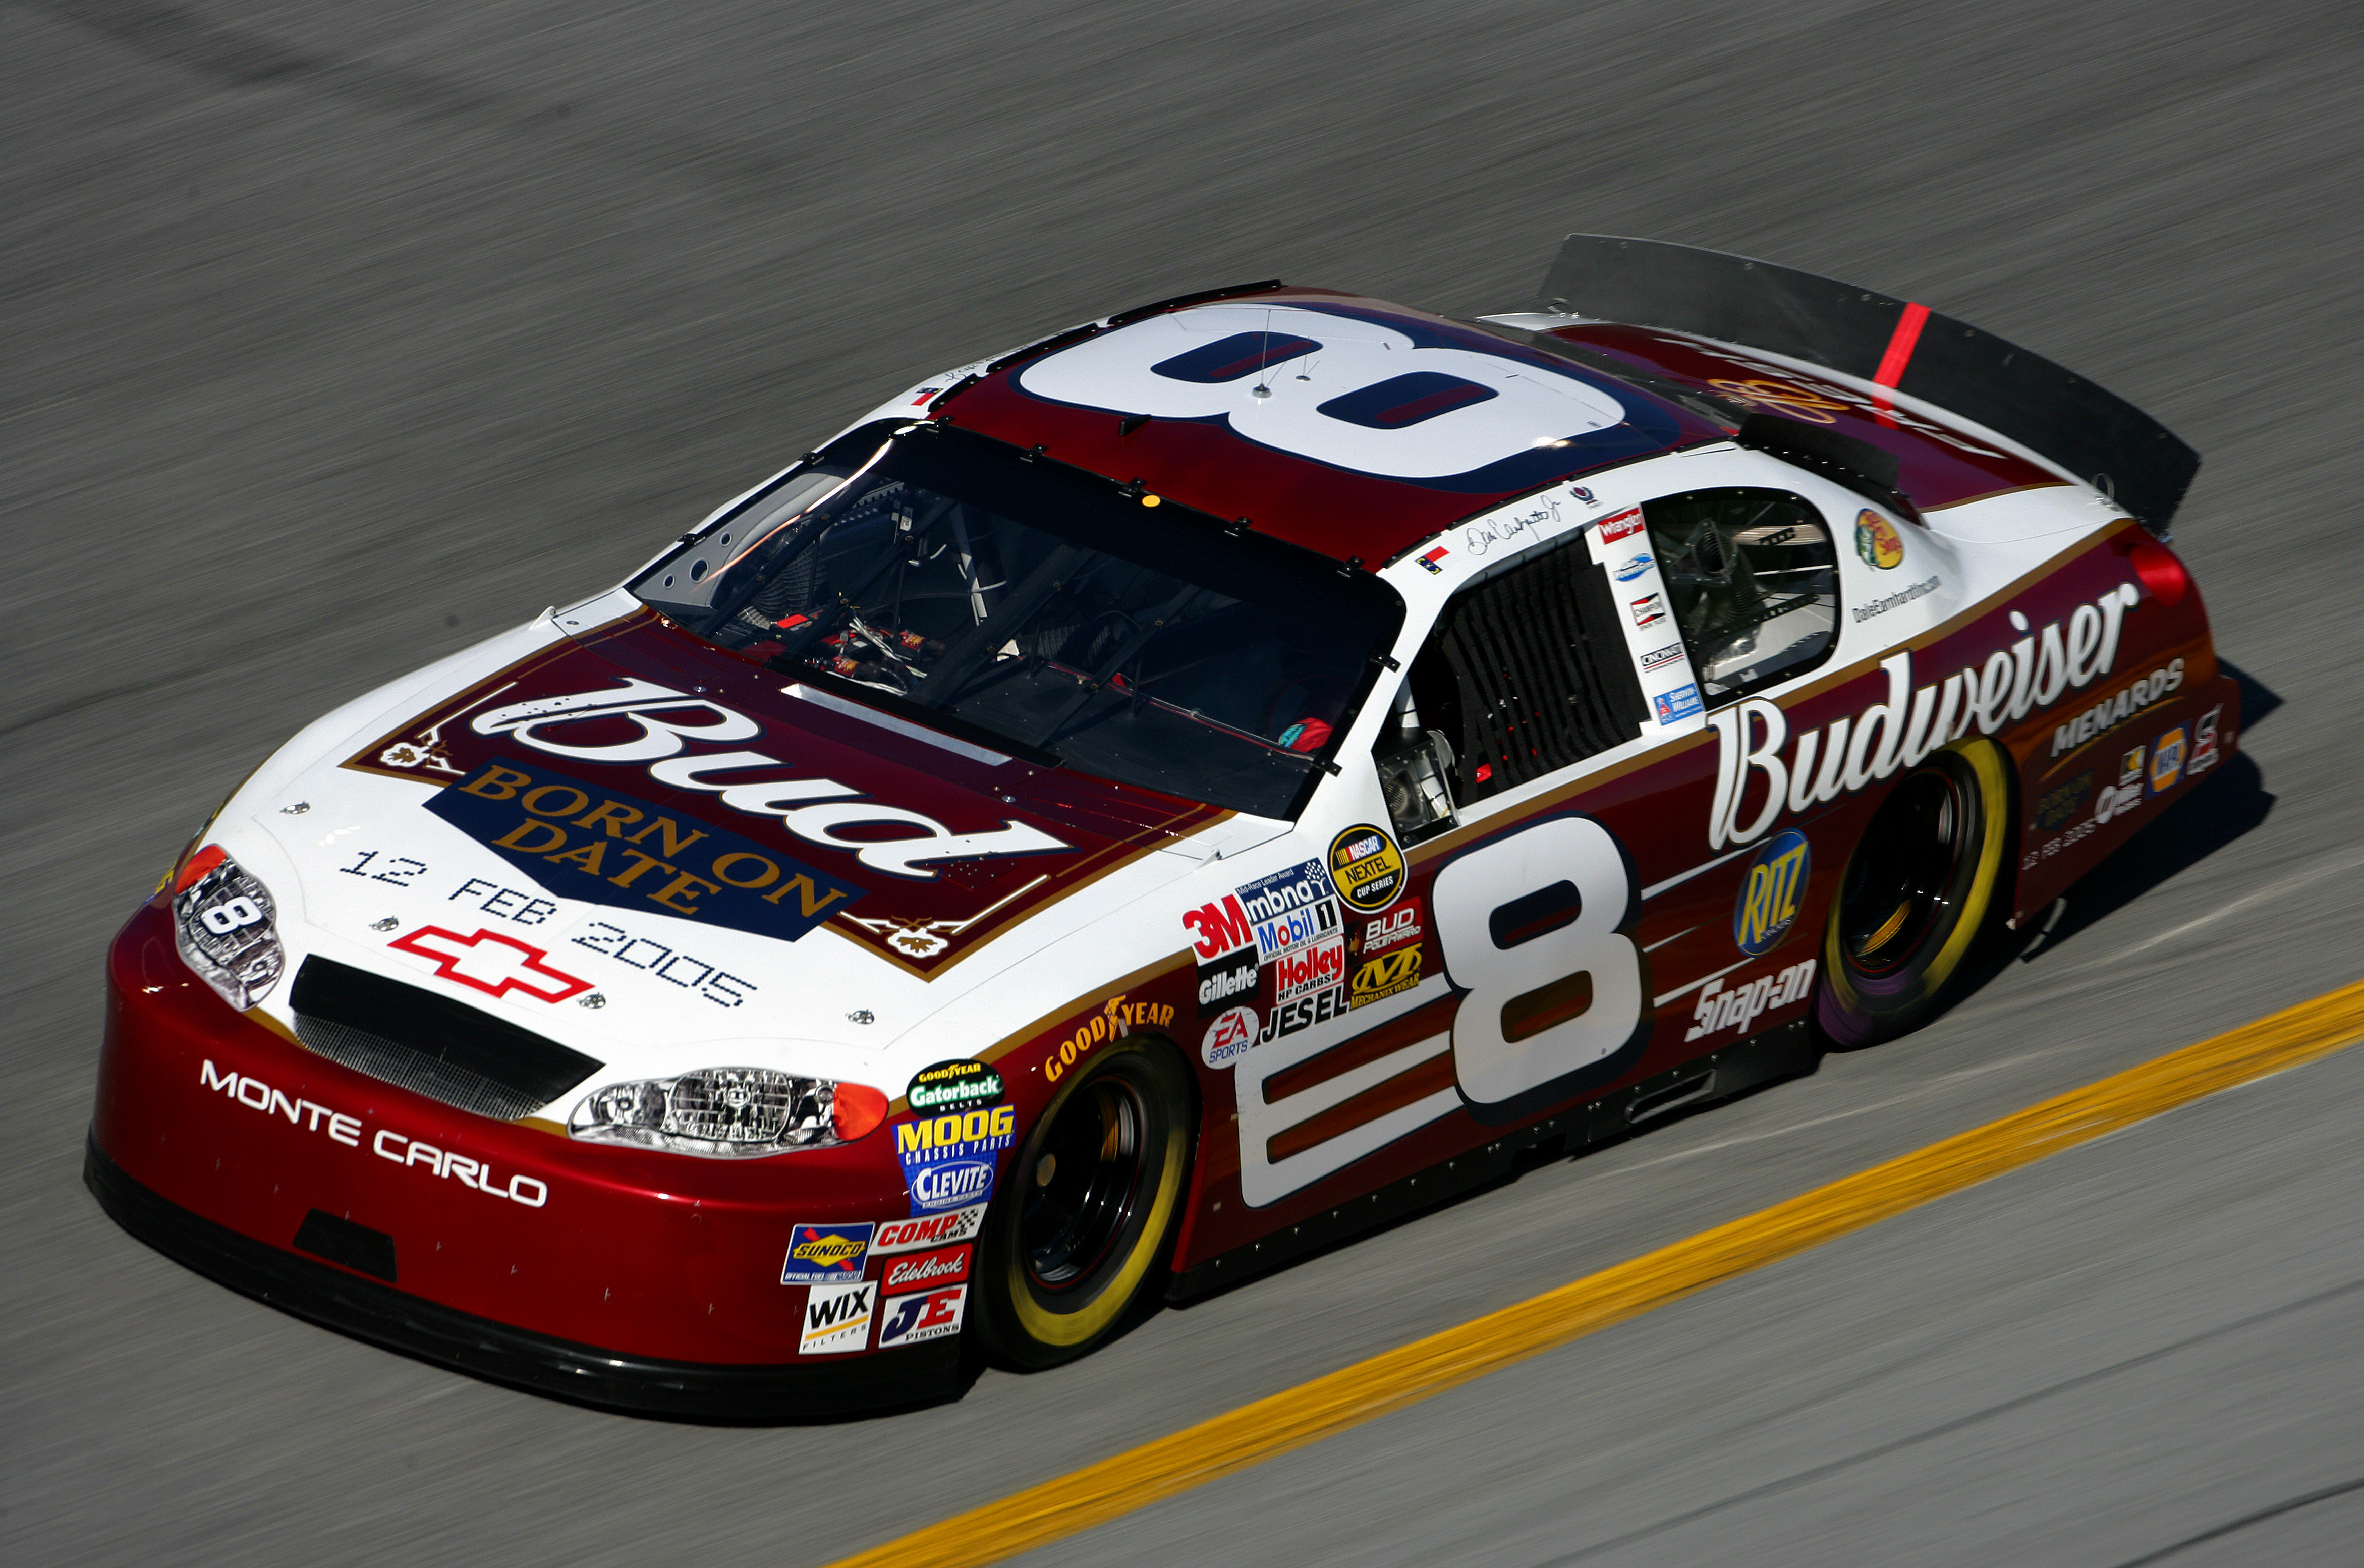 DAYTONA BEACH, FL - FEBRUARY 11:  Dale Earnhardt Jr drives the #8 Budweiser Chevrolet during practice for the Budweiser Shootout at the NASCAR Nextel Cup Daytona 500 on February 11, 2005 at the Daytona International Speedway in Daytona, Florida.  (Photo B